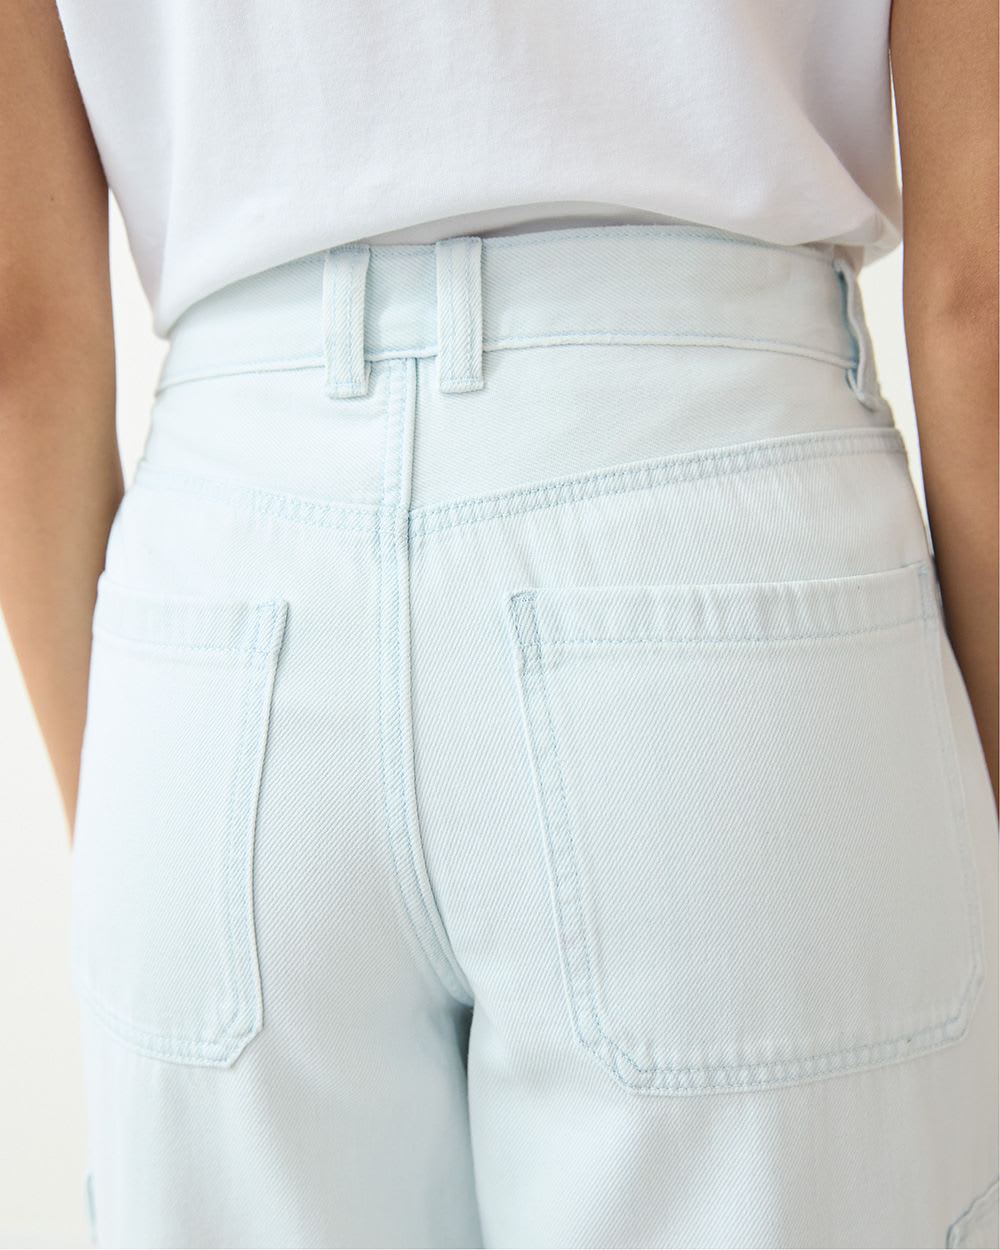 Wide-Leg High-Rise Jean with Cargo Pockets